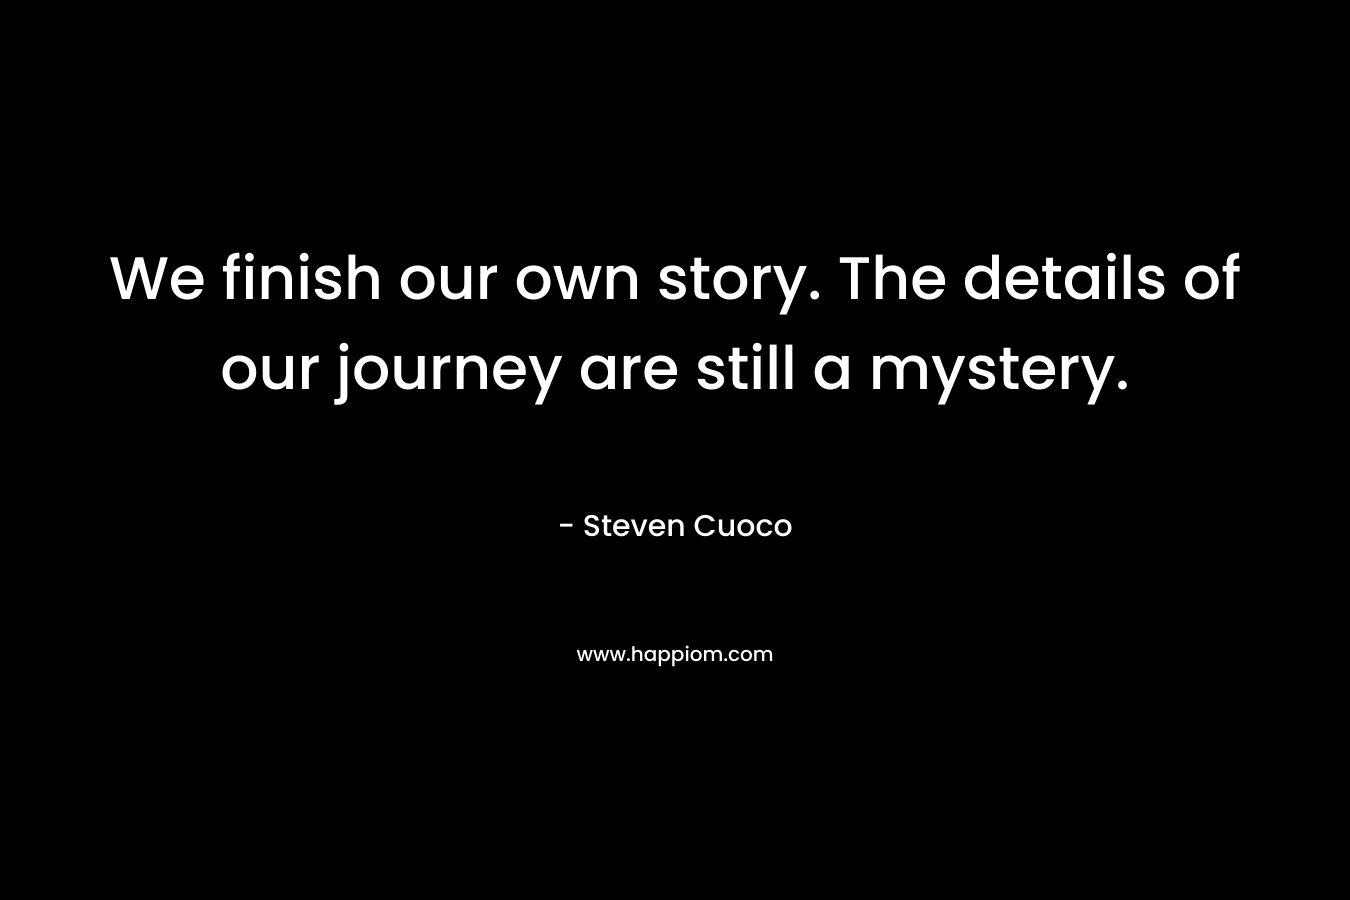 We finish our own story. The details of our journey are still a mystery. – Steven Cuoco